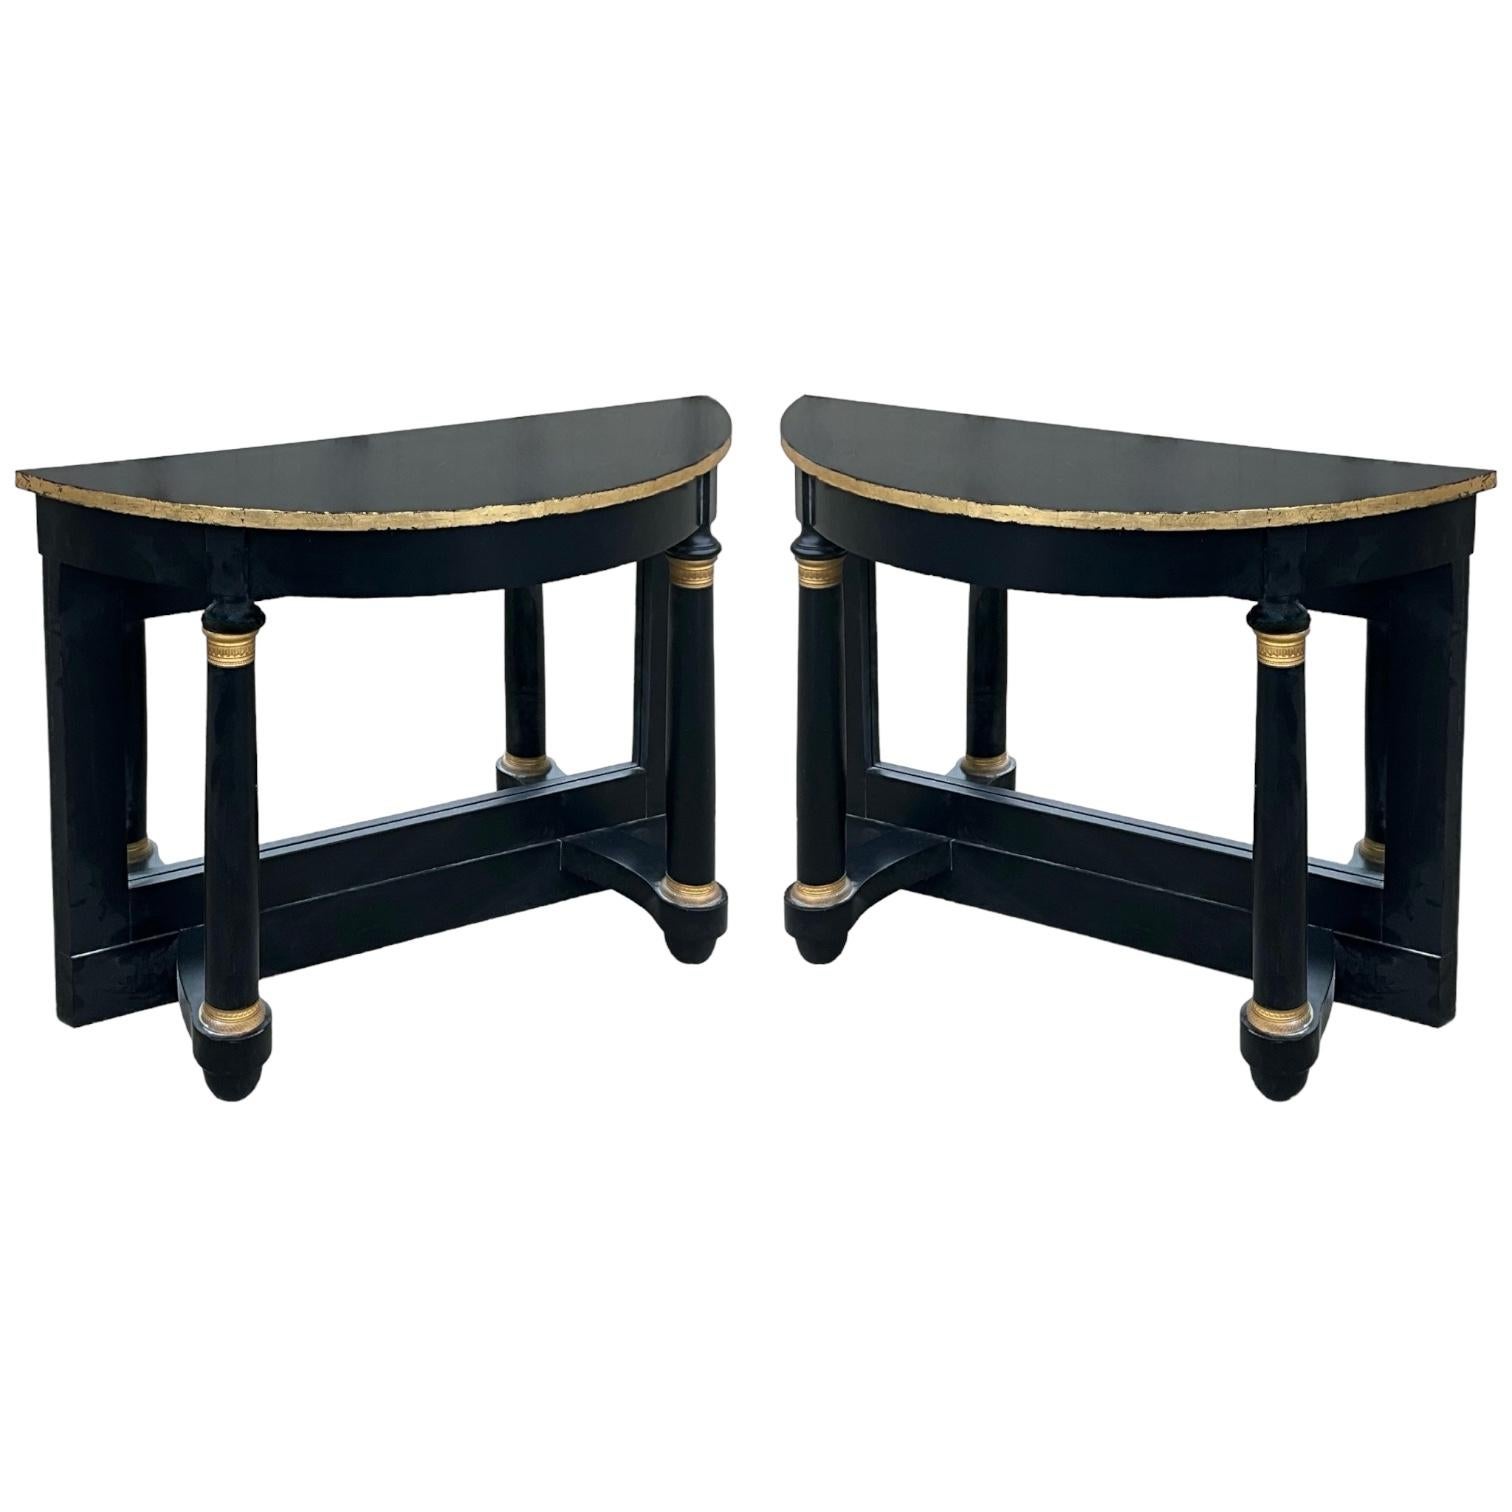 French Neo-Classical Style Maison Jansen Black & Gilt Bronze Console Tables -S/2 For Sale 5